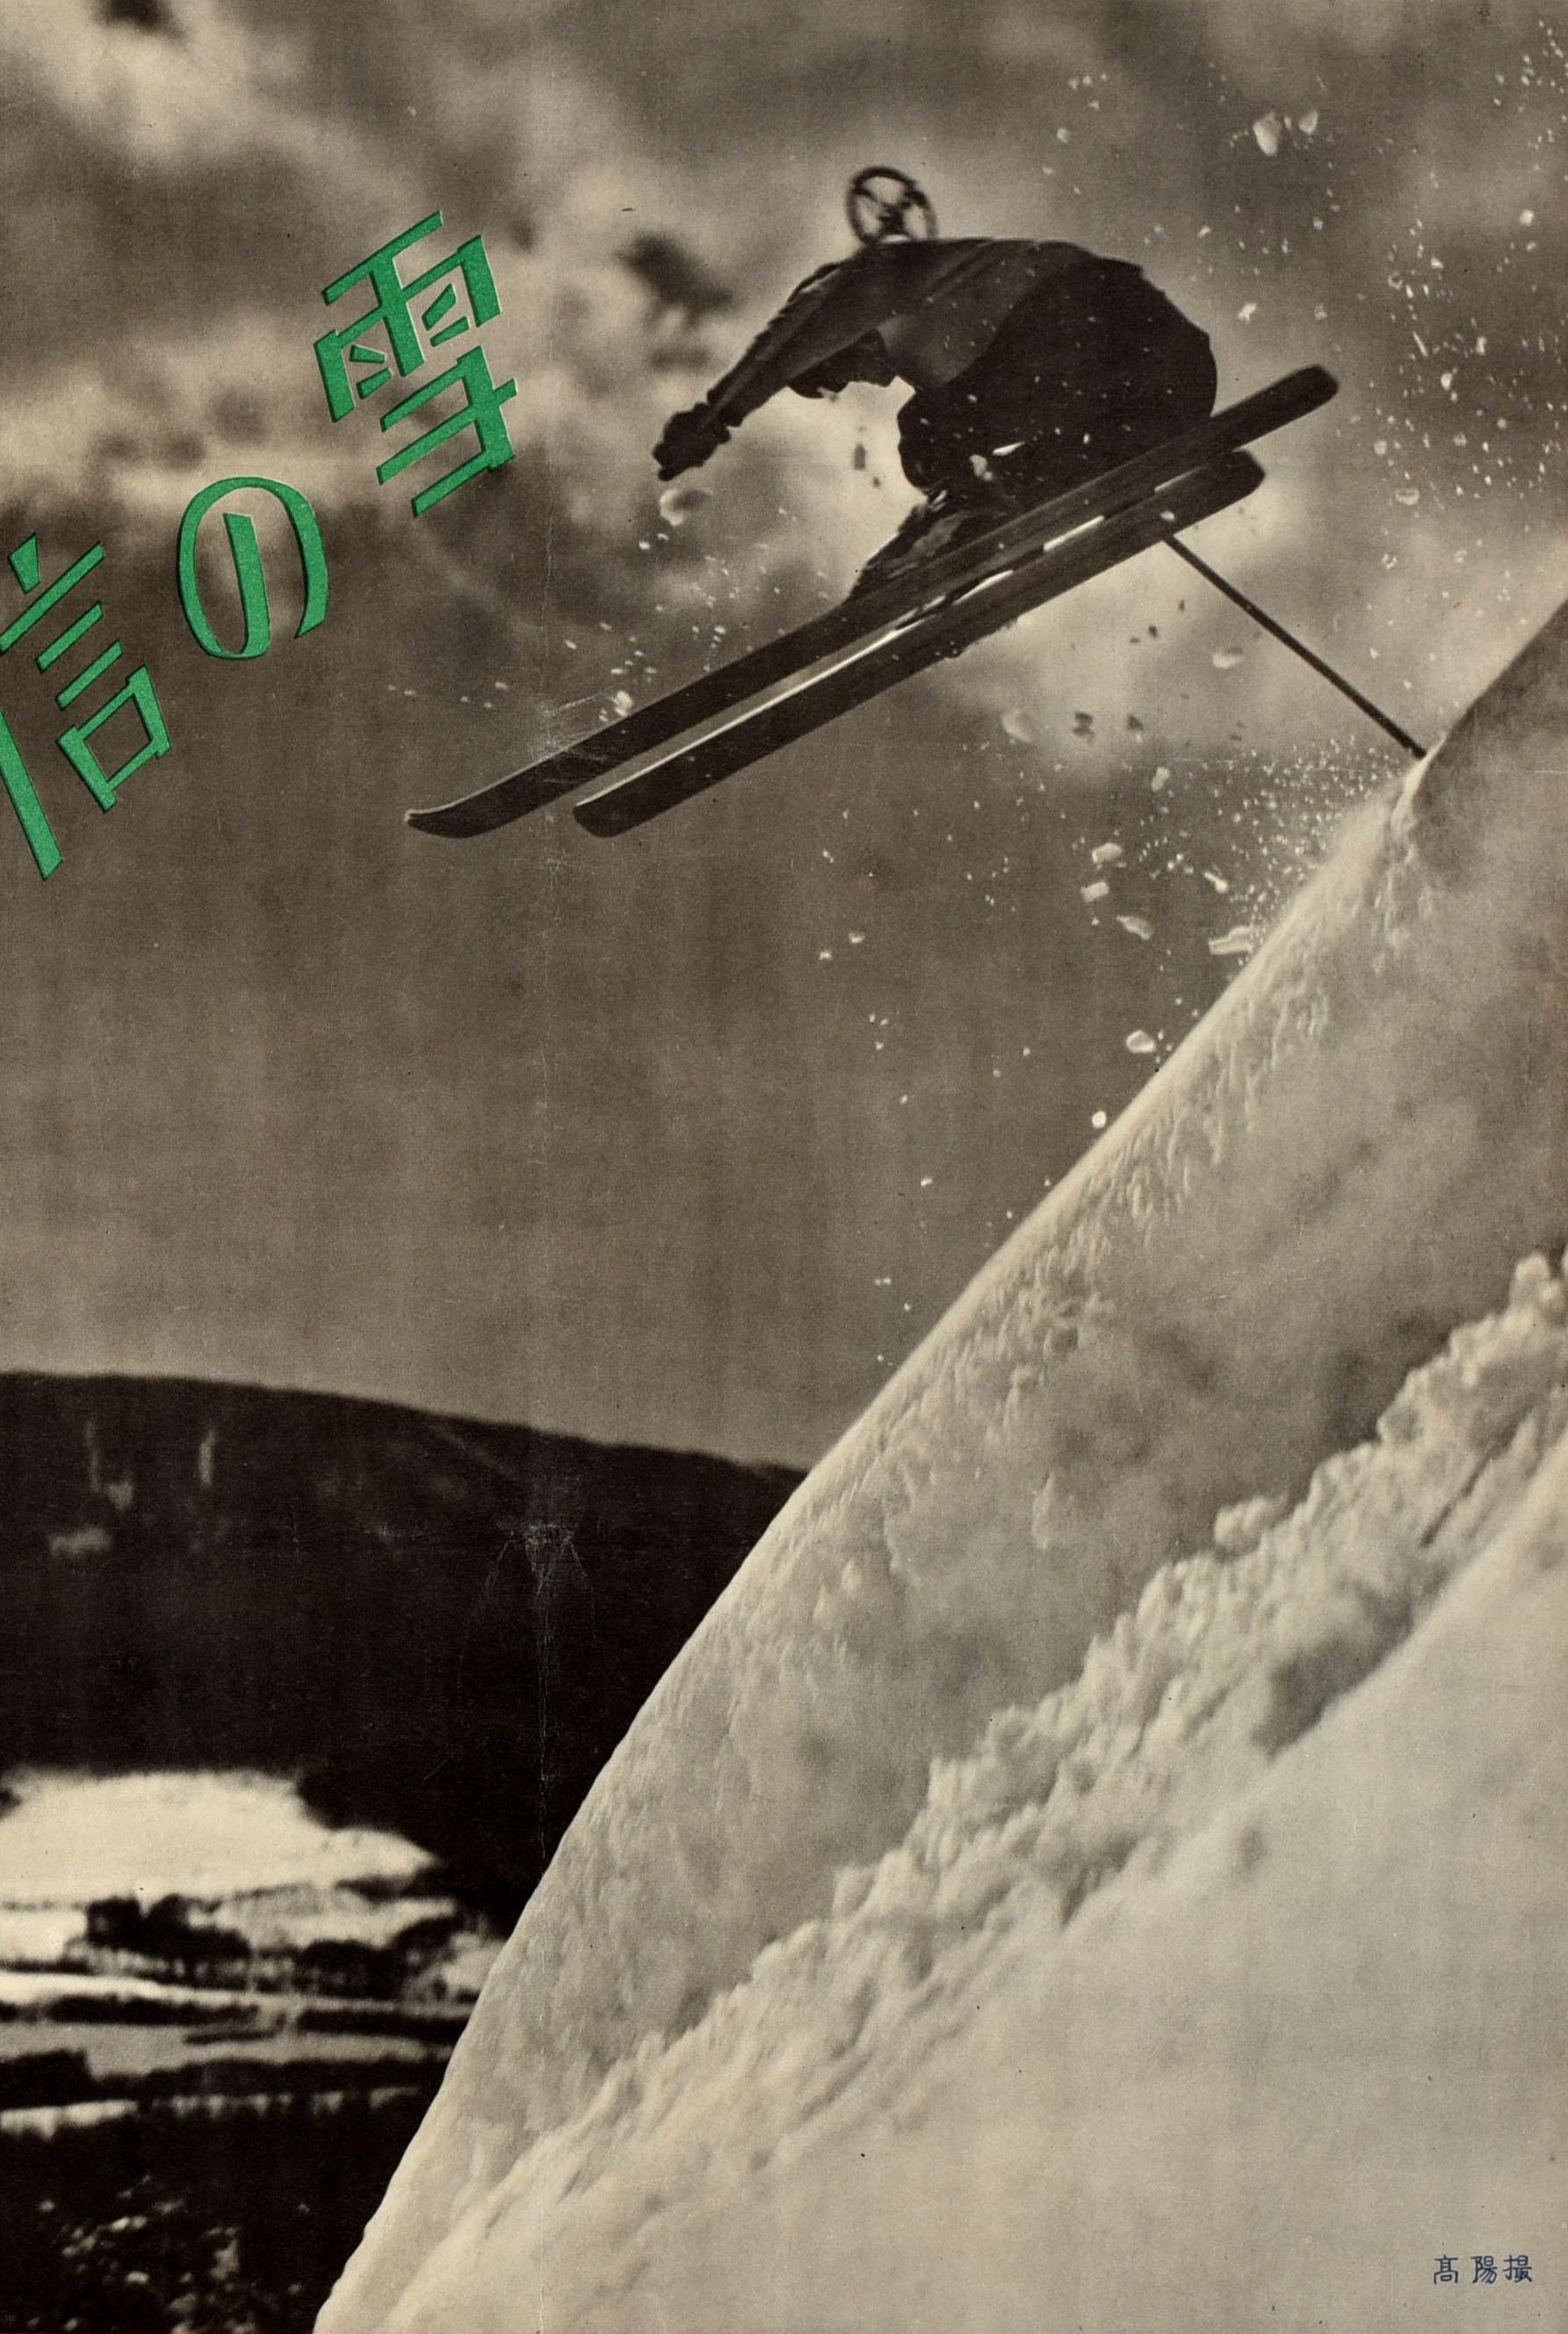 Original vintage skiing and winter sport travel poster for Shinsu / Shinano ski resort in the Nagano Prefecture Japan featuring a black and white photograph of a skier jumping off a snowy slope with the Japanese text curved in green on the side and